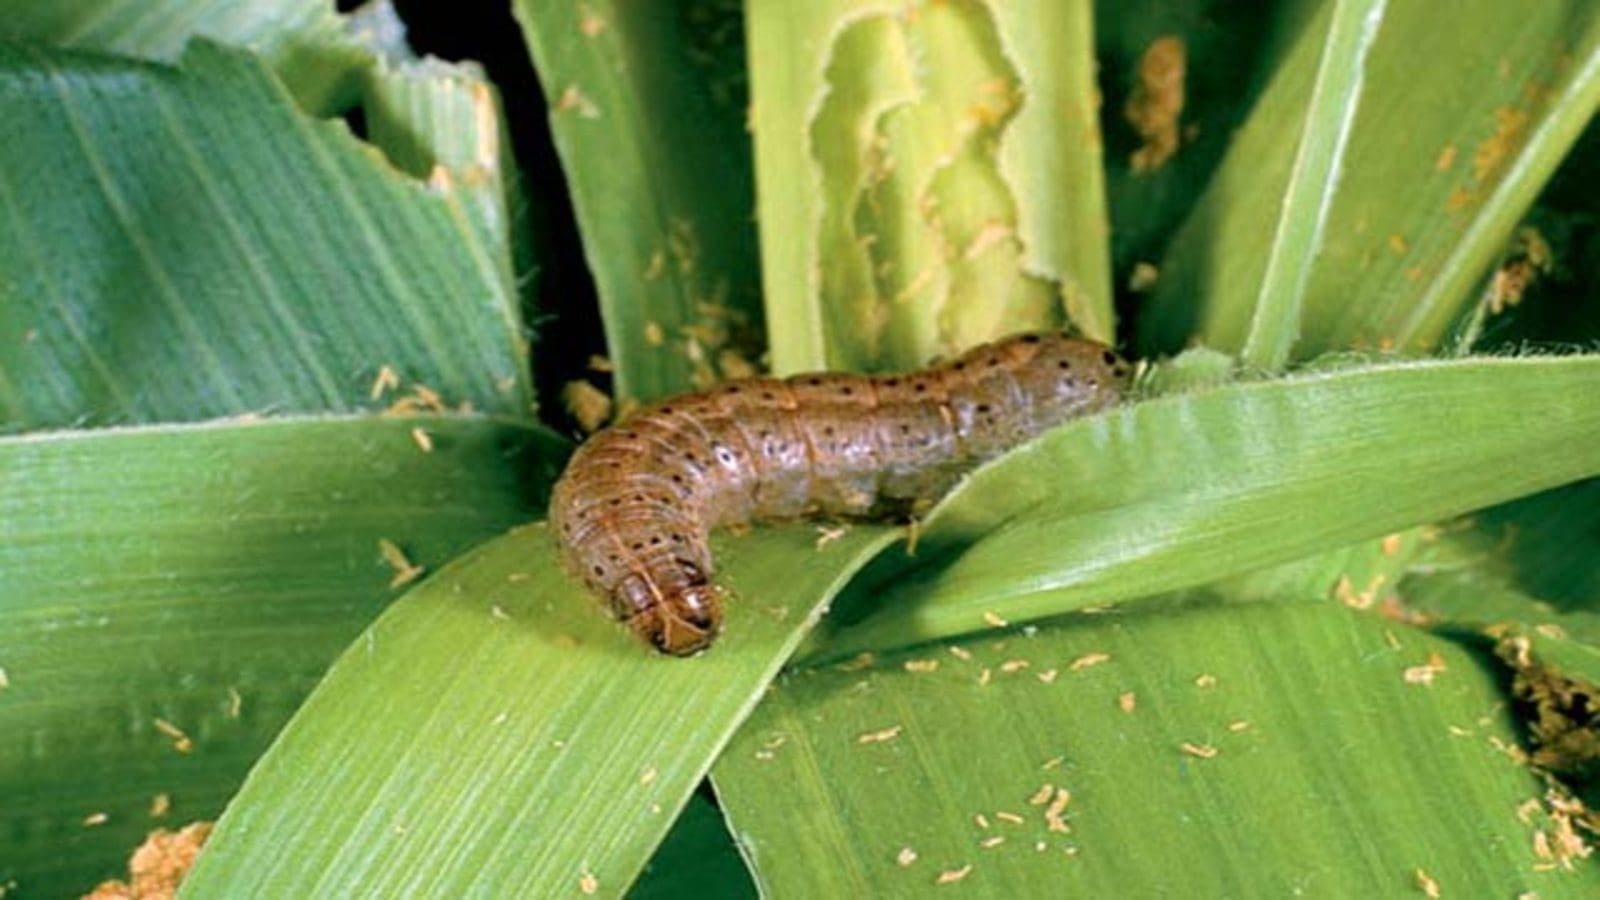 Maize crop at risk from devastating fall armyworm pest resurgence , FAO warns